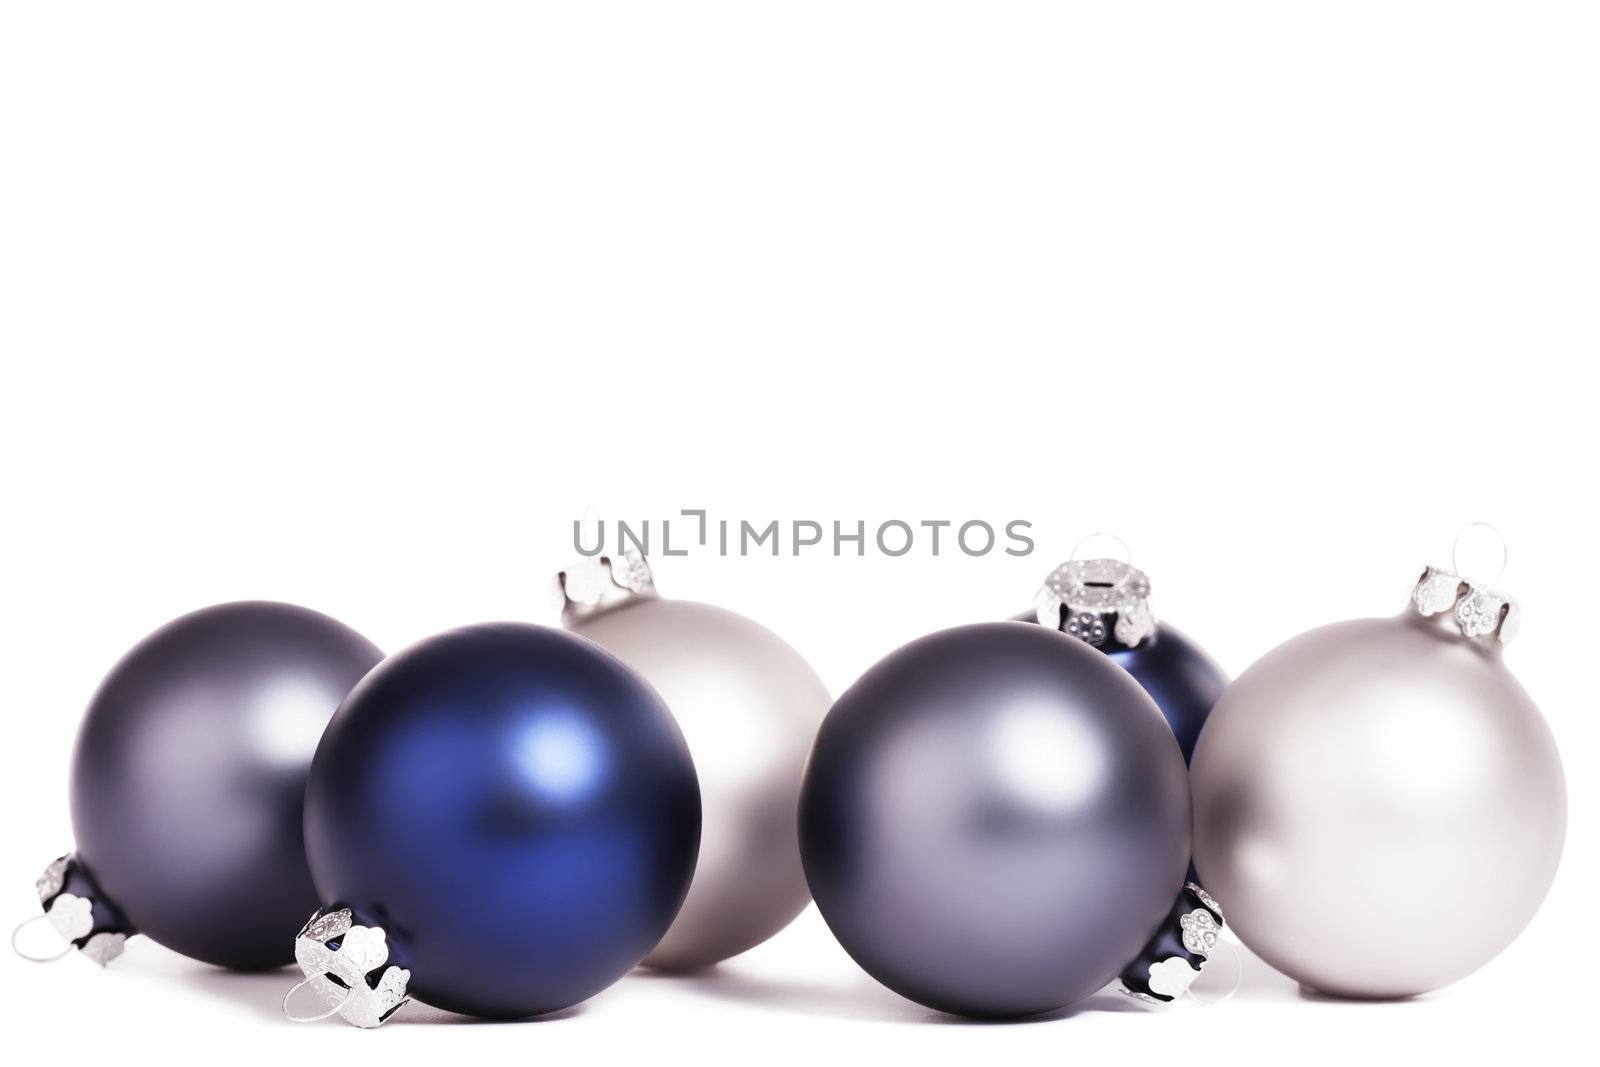 some silver and blue christmas balls on white background